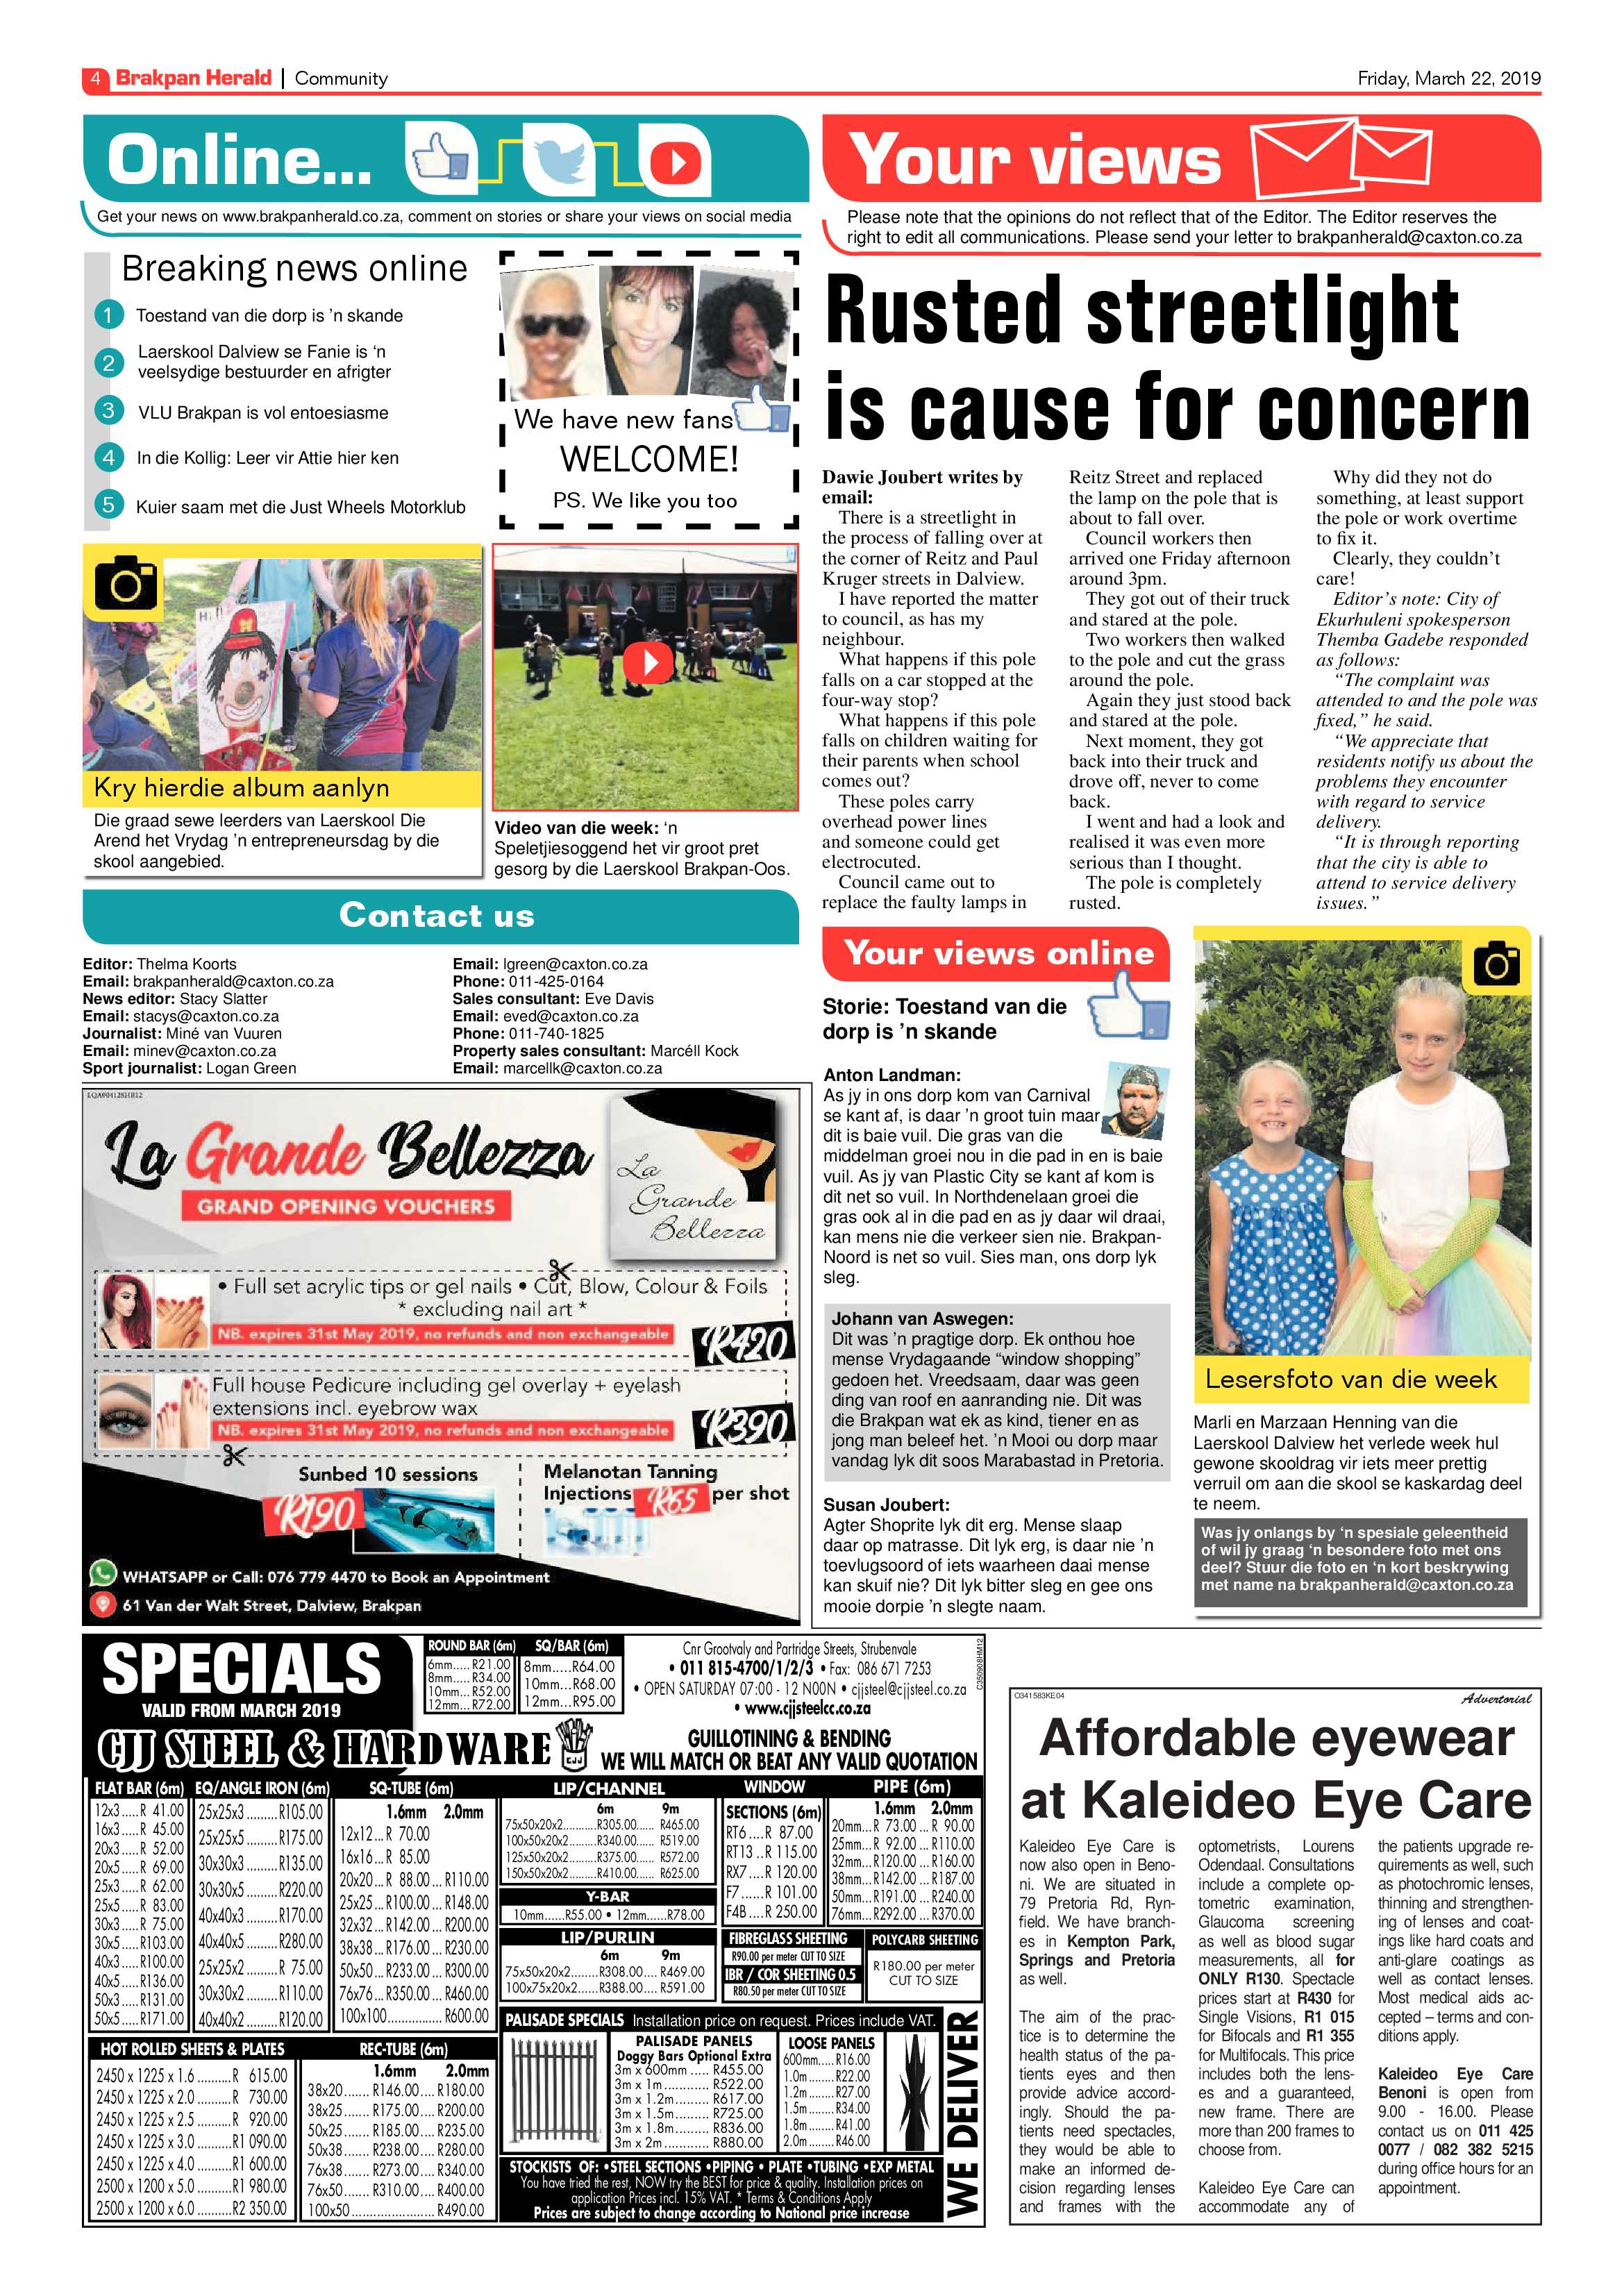 Brakpan Herald 22 March 2019 page 4